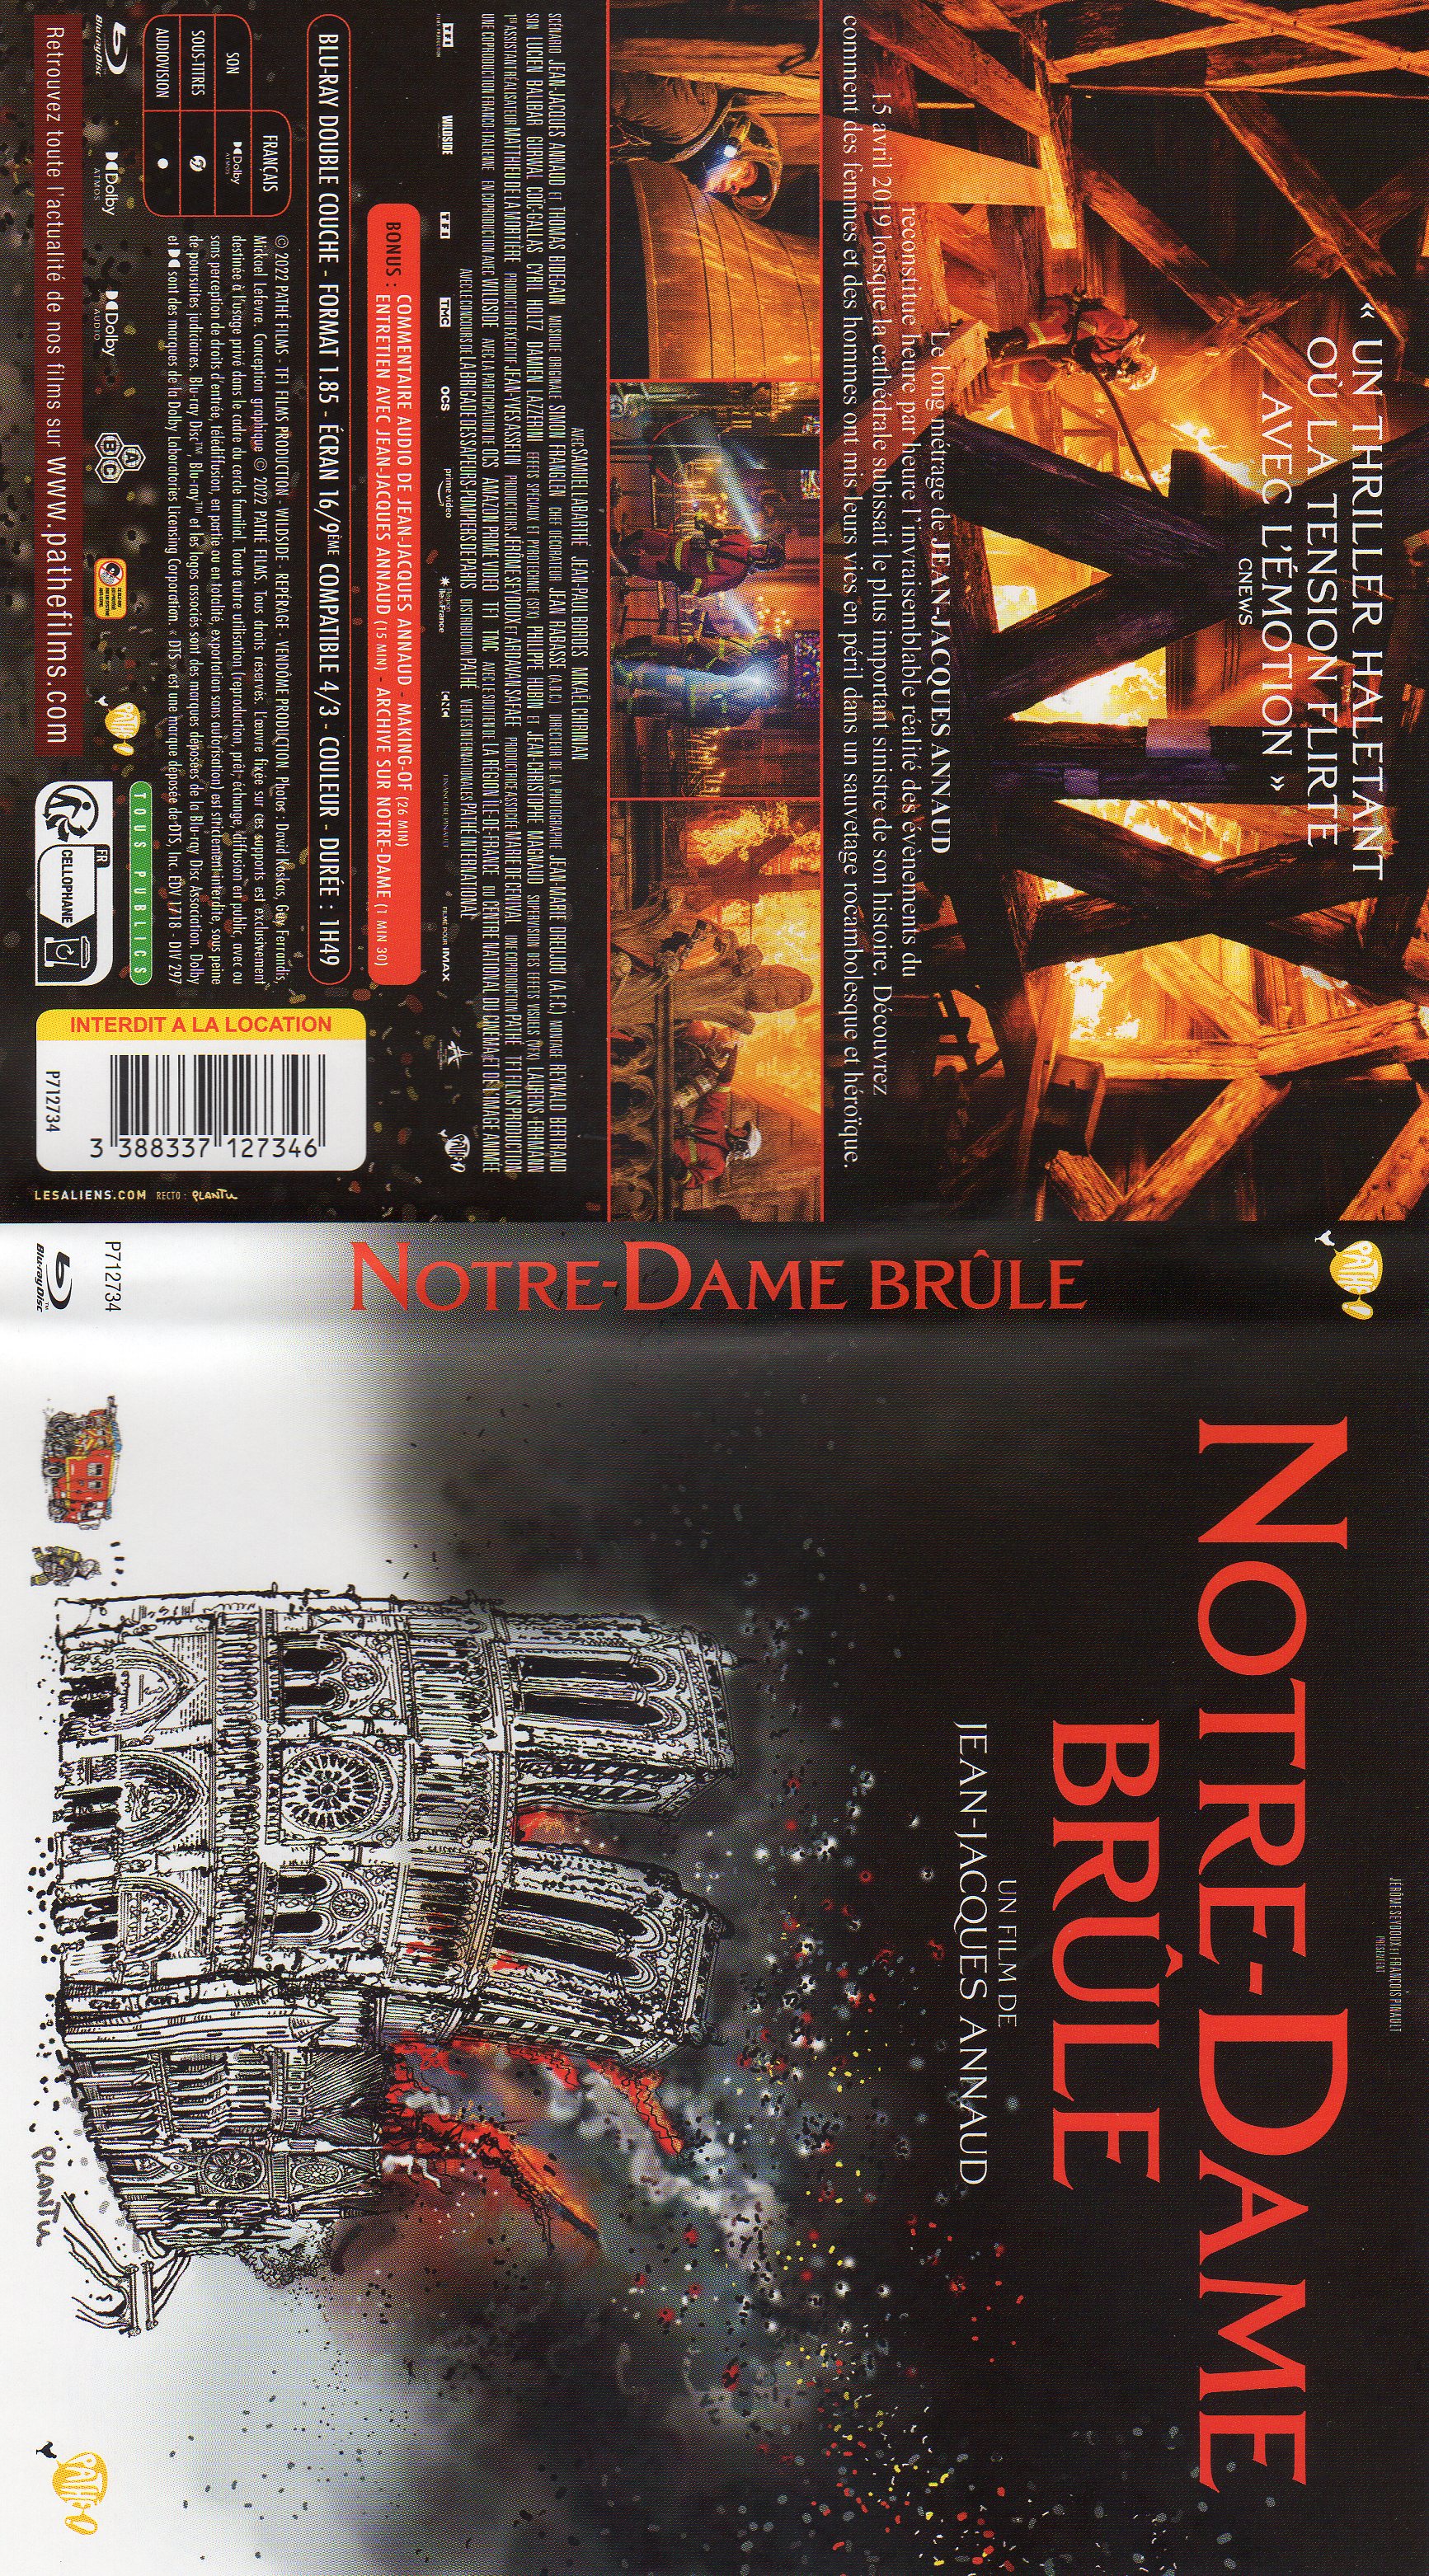 Jaquette DVD Notre-Dame brule (BLU-RAY)